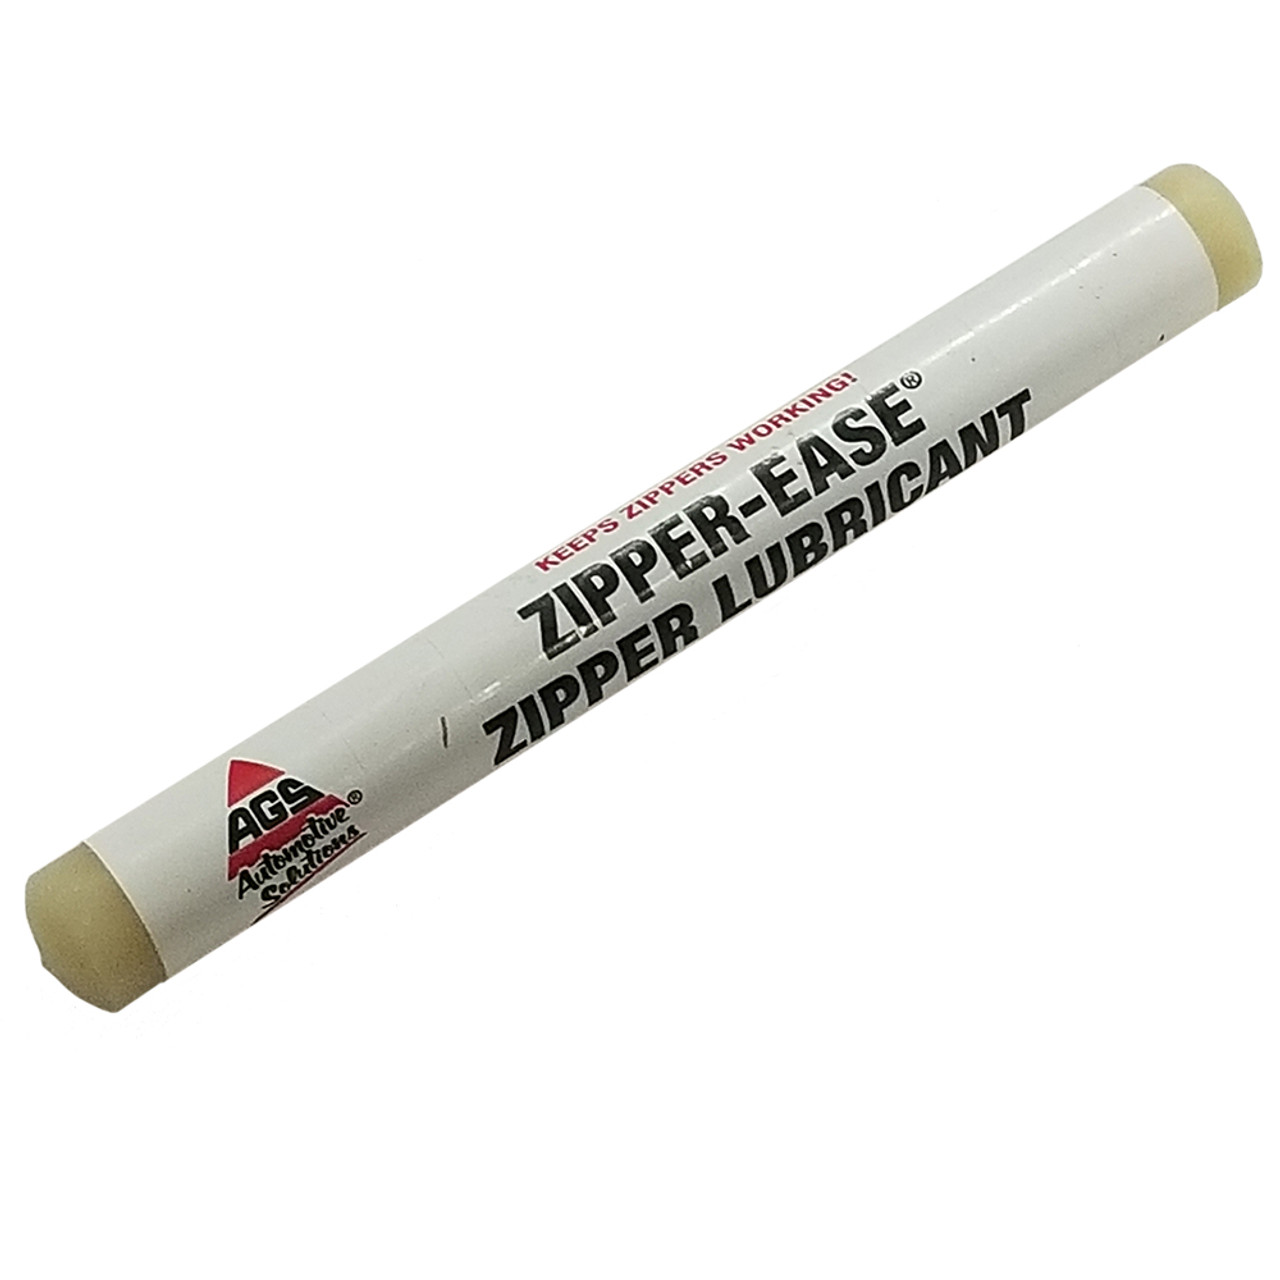 Zipperease Grease Stick